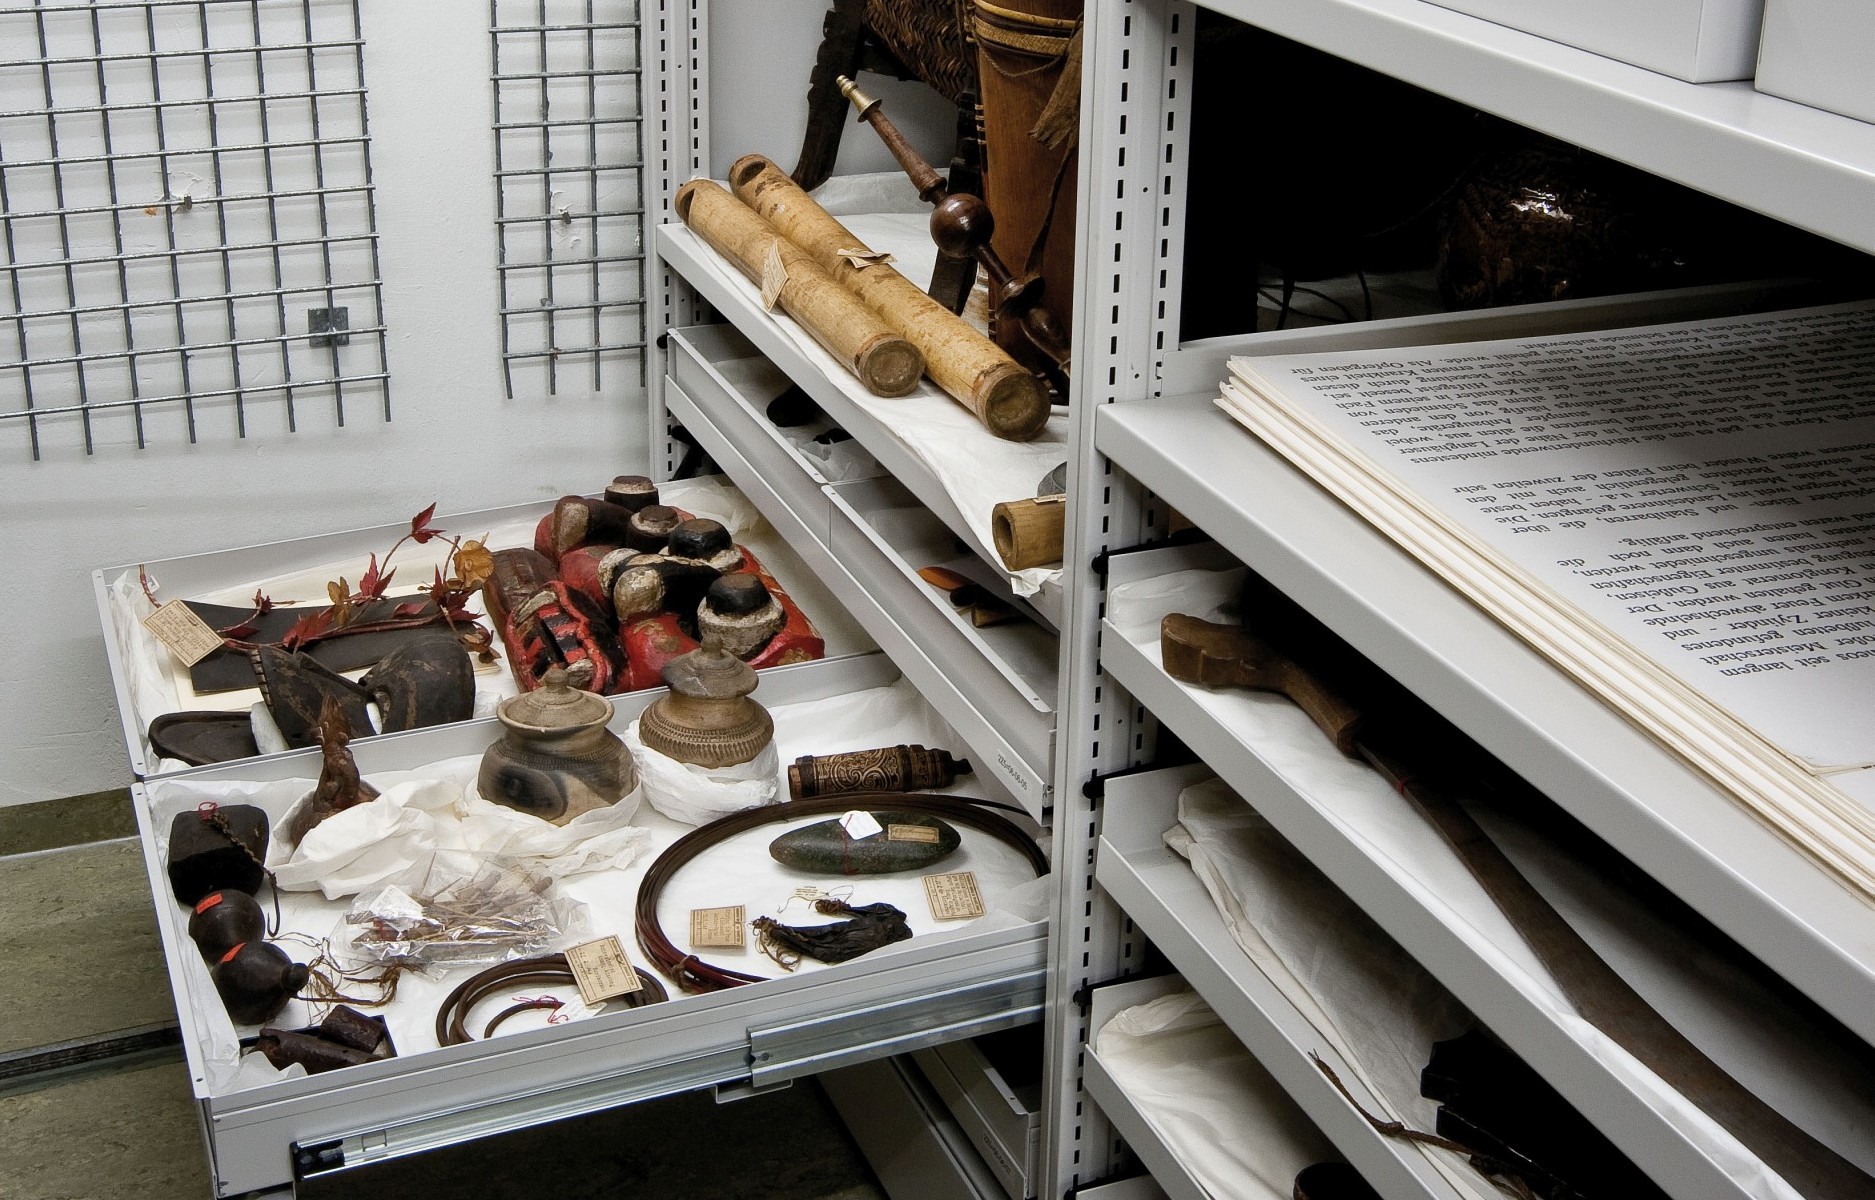 Objects from Borneo collected by the Ernst Friedrich Will in the Indonesia section of the store at the Five Continents Museum in Munich (Image: Marietta Weidner/Five Continents Museum)